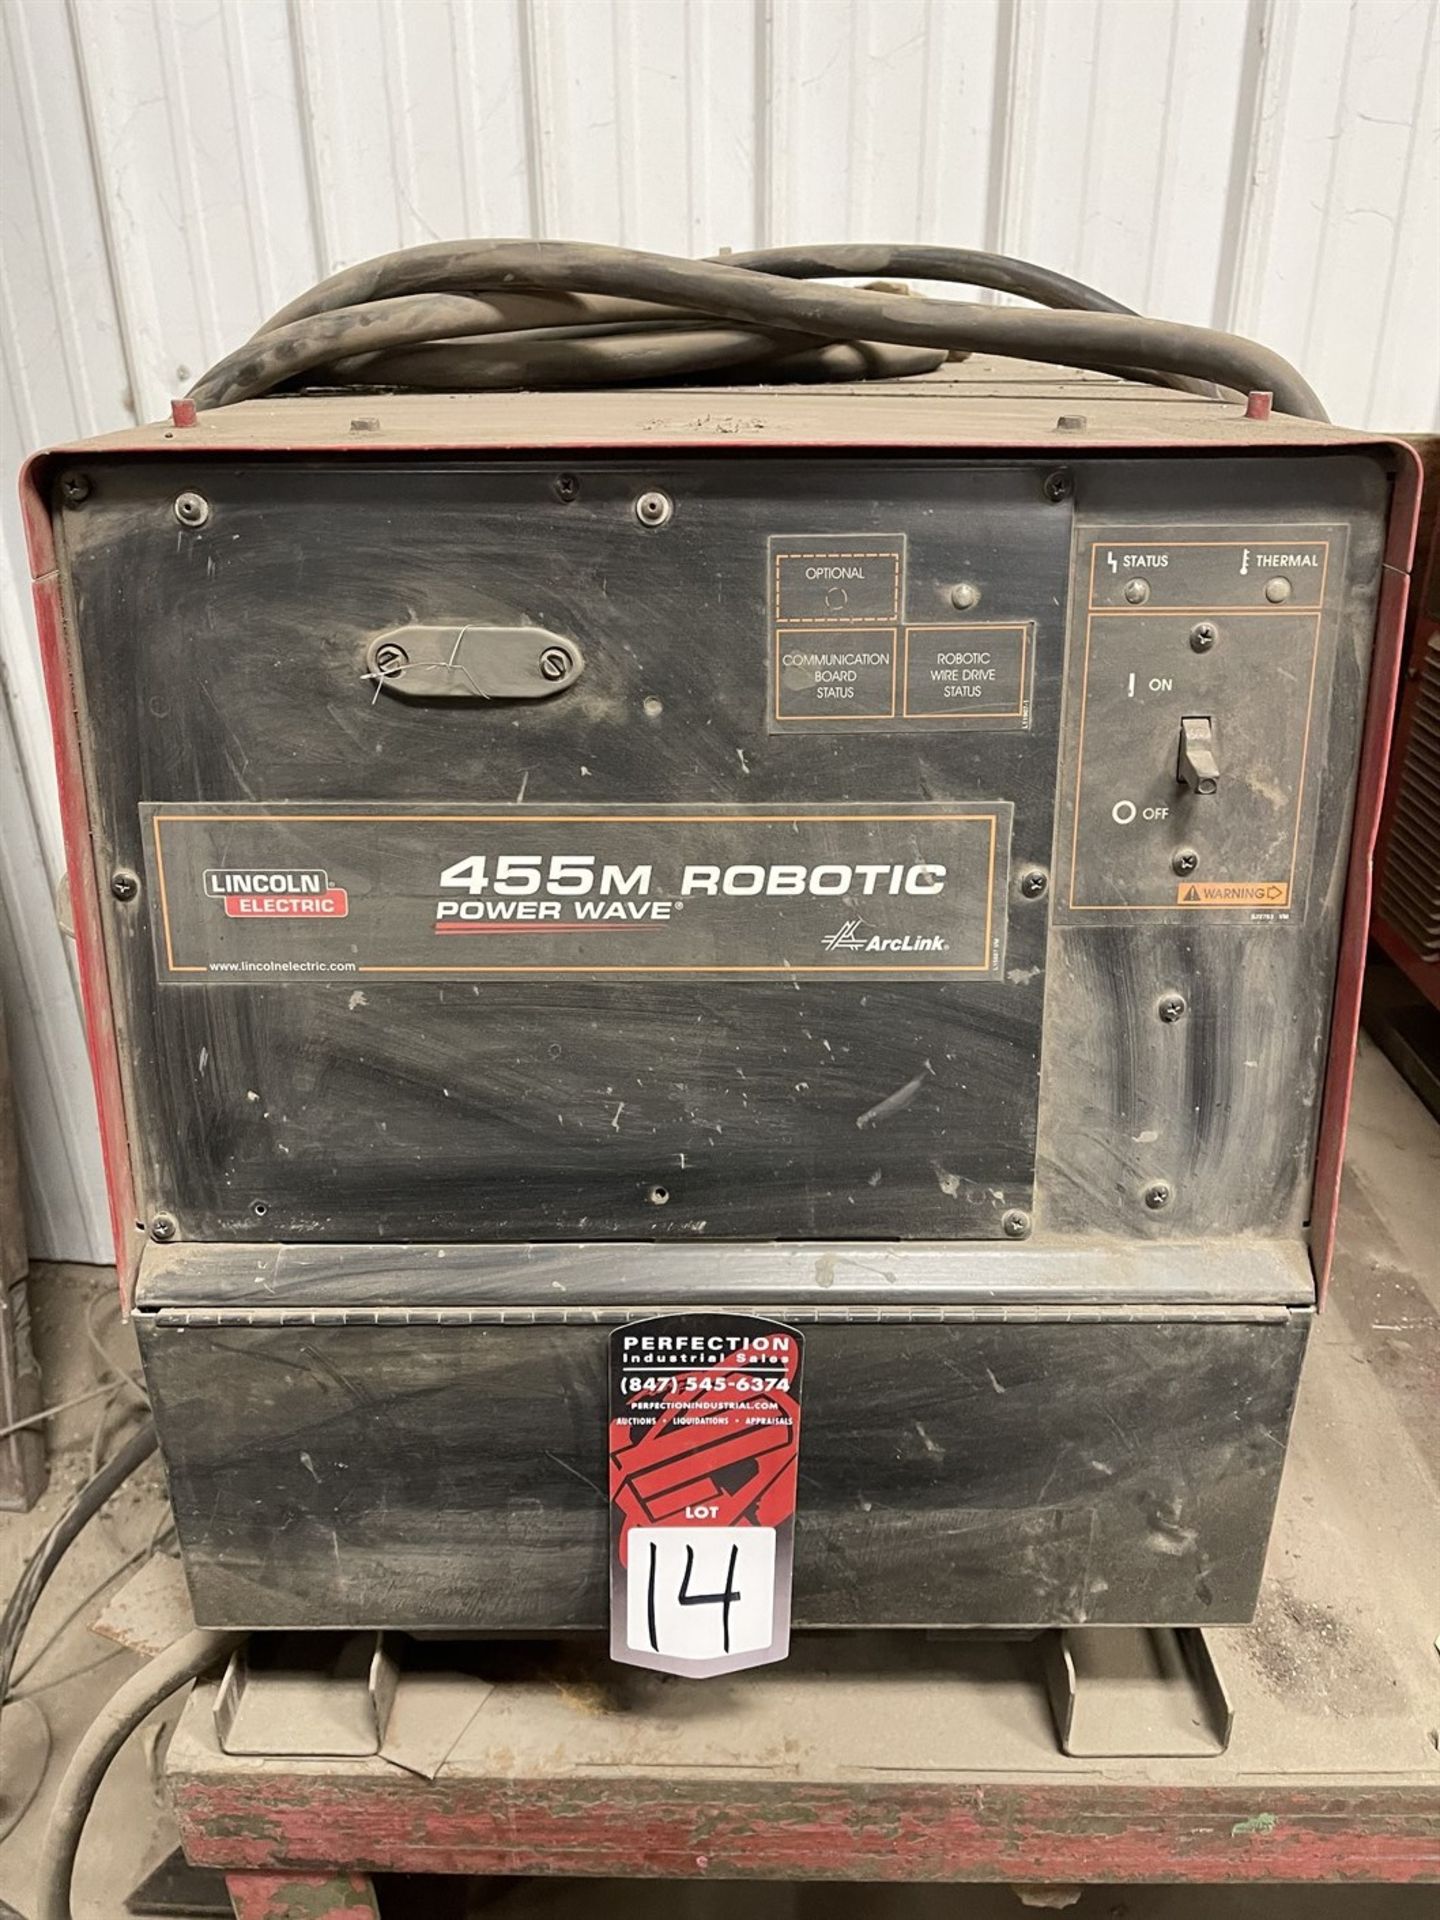 Lincoln 455M Robotic Power Wave Welder, s/n na - Image 2 of 3